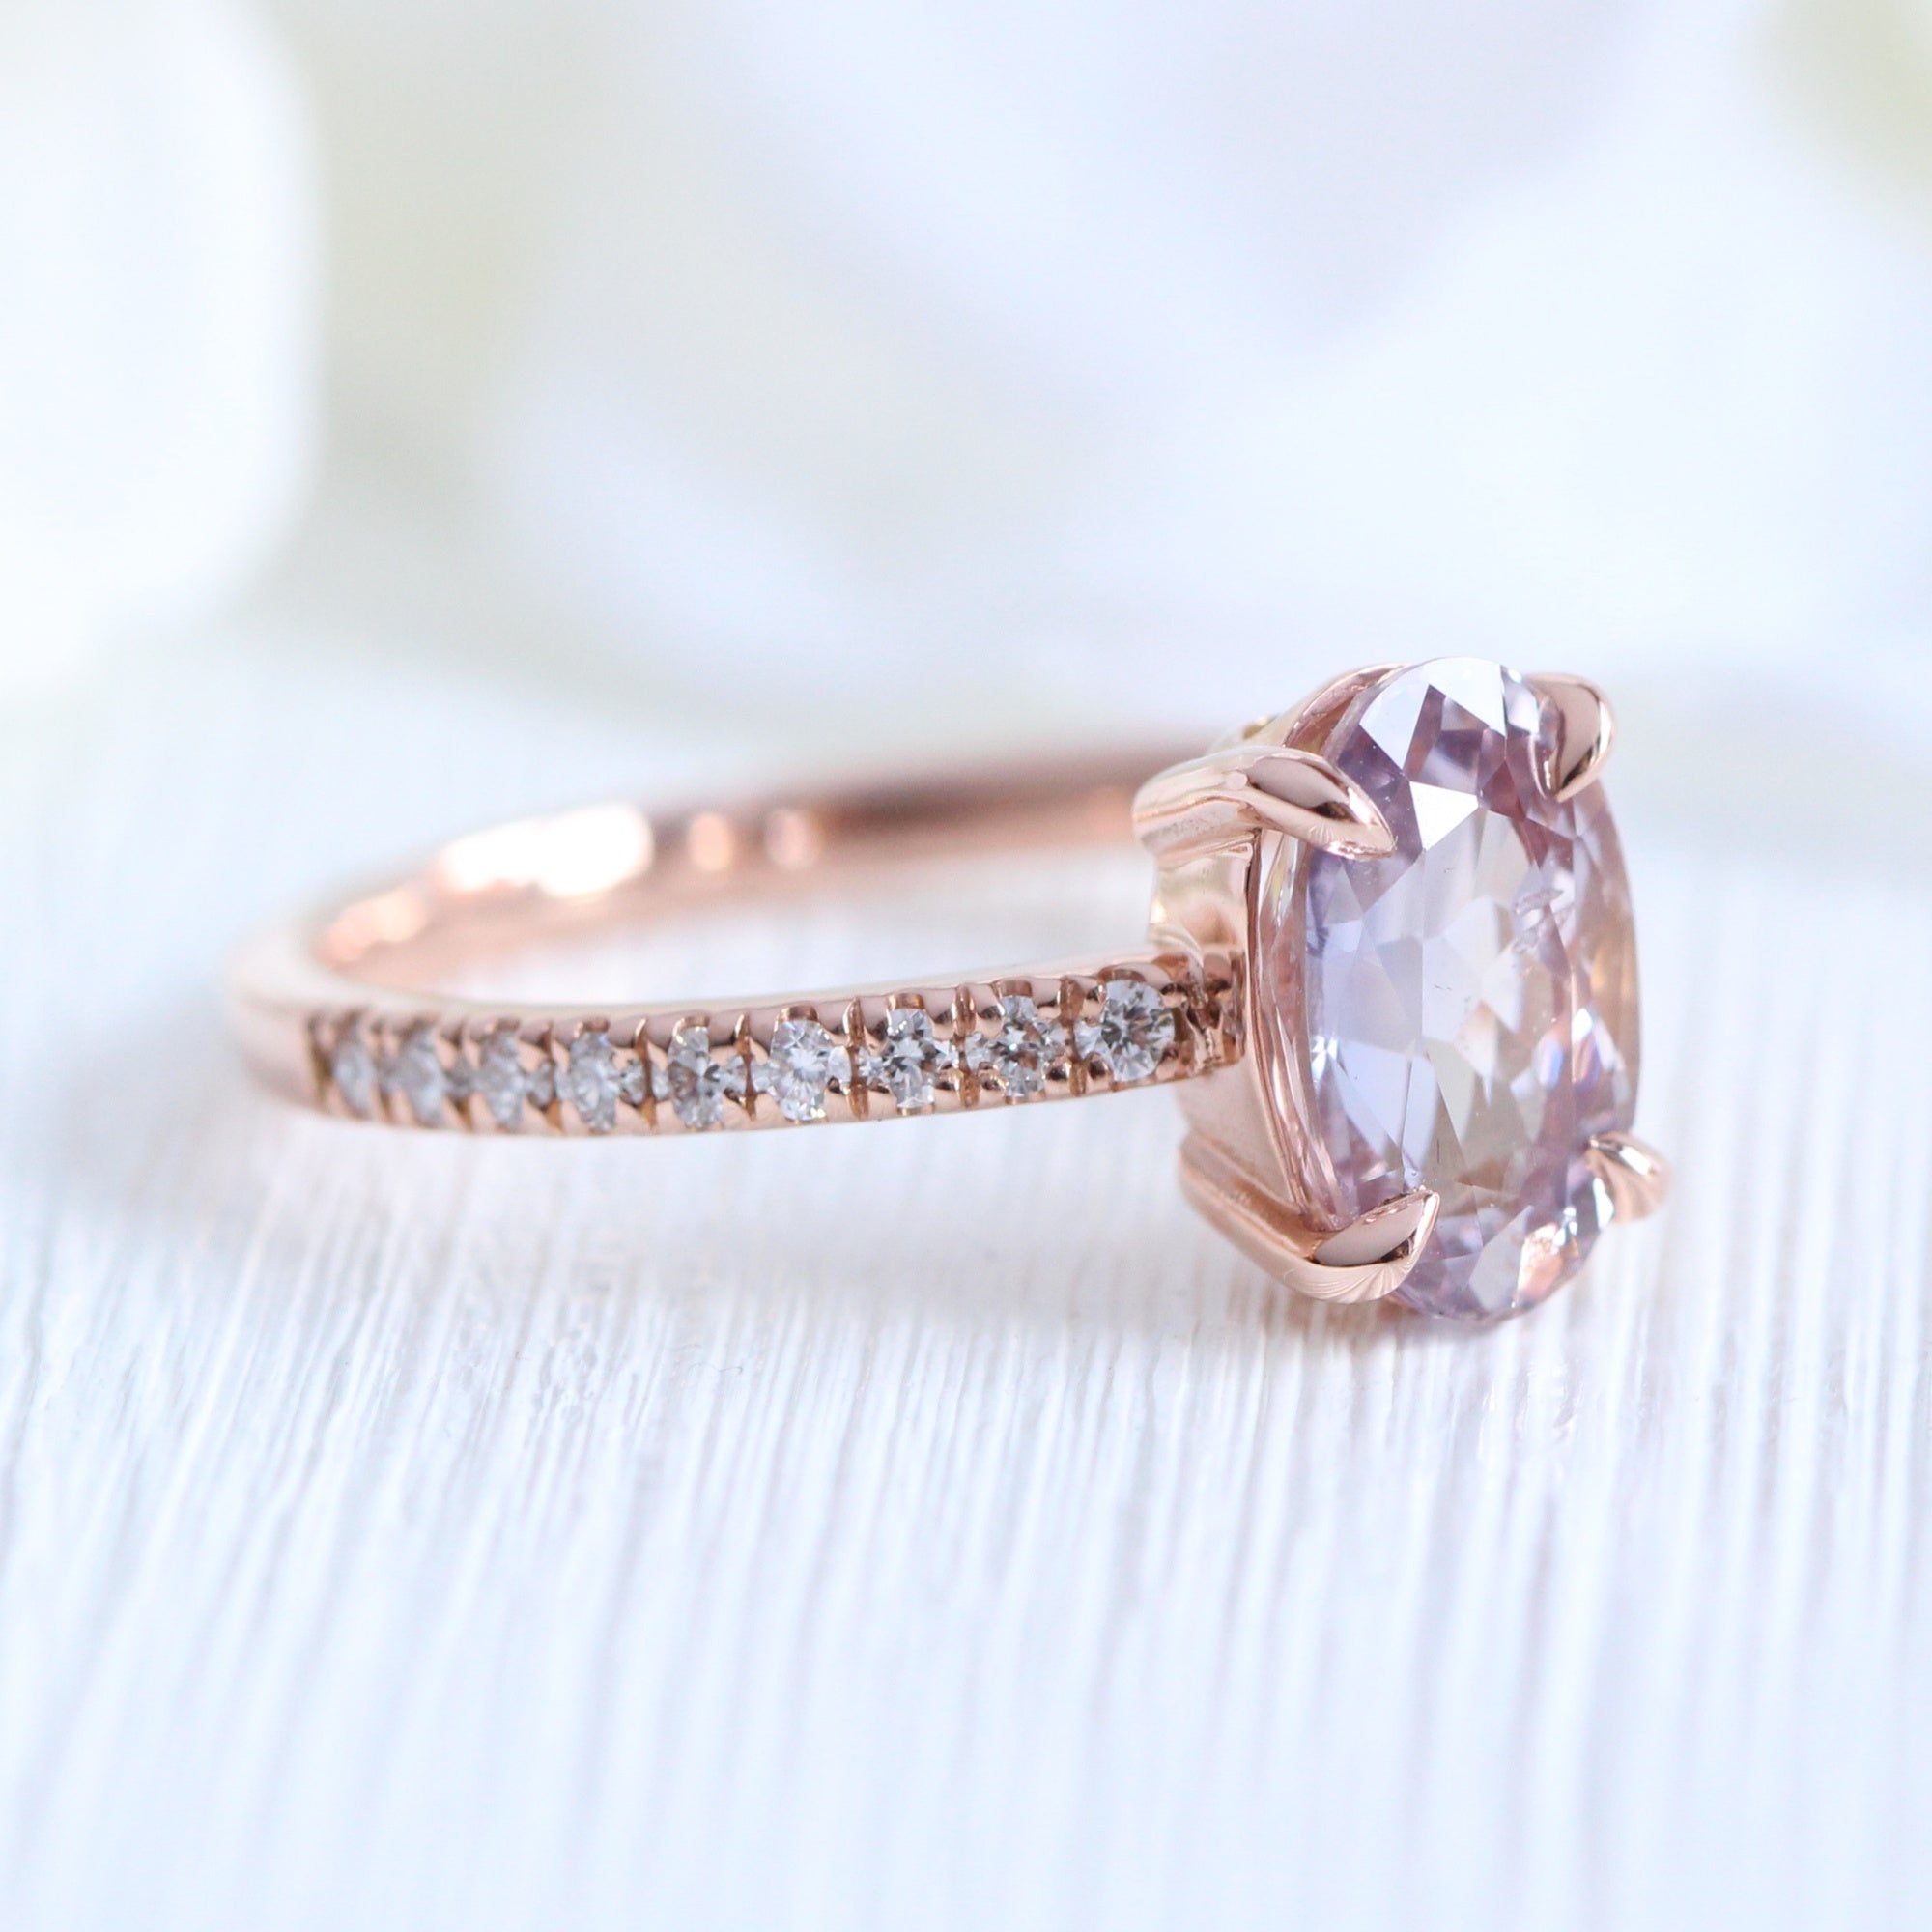 elongated oval lavender sapphire ring rose gold solitaire ring pave band la more design jewelry